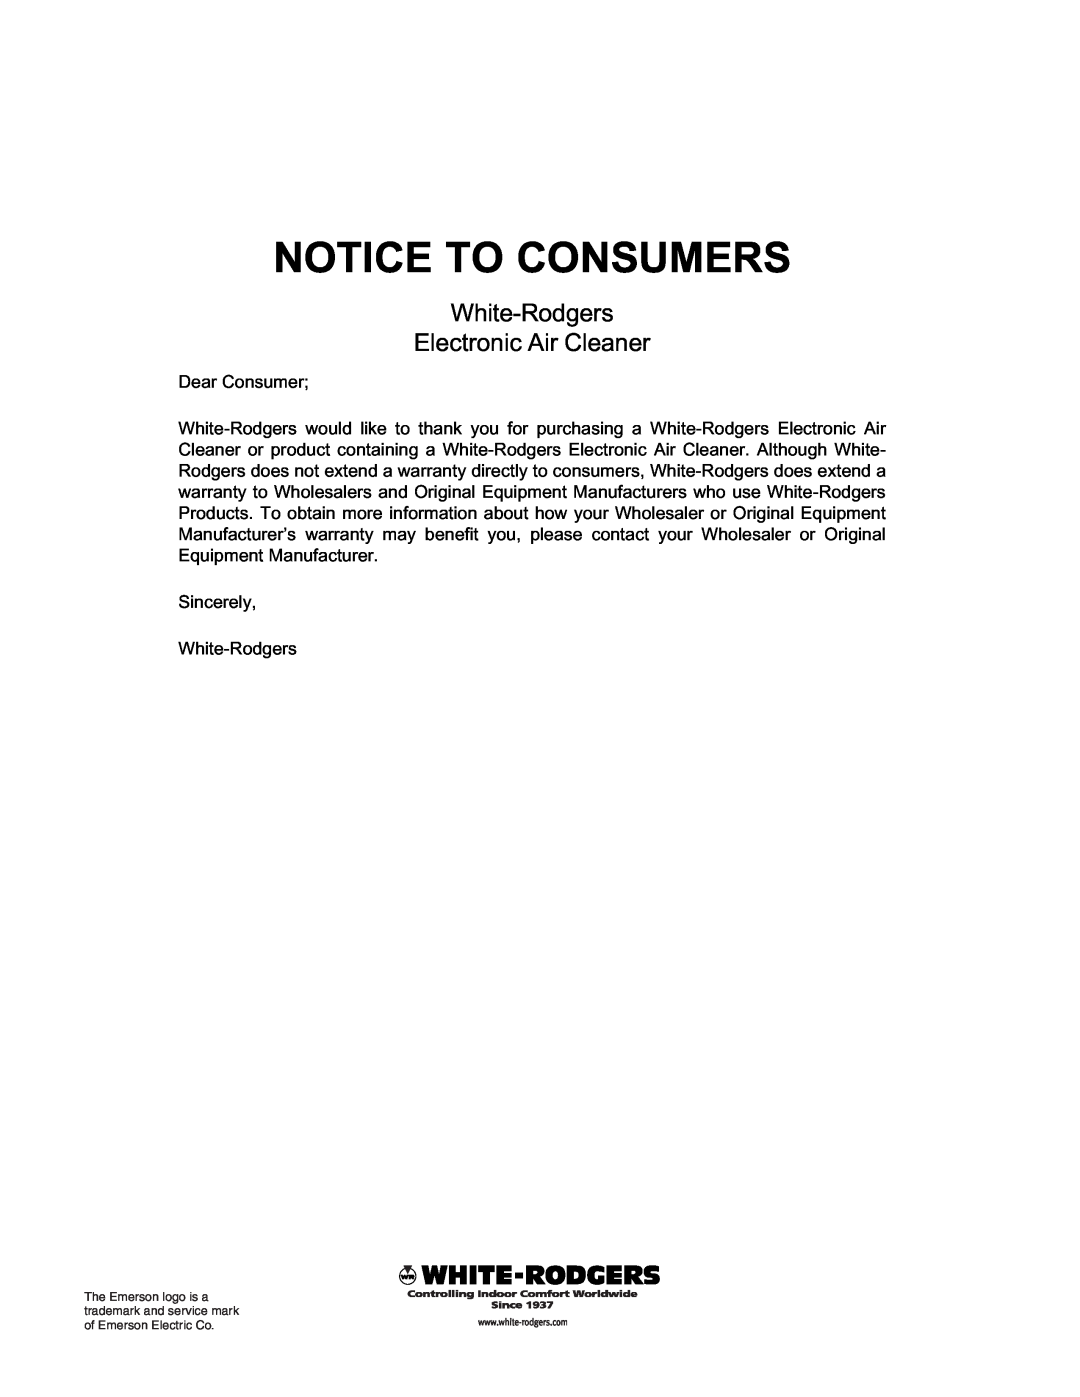 White Rodgers pmnACM/ACB owner manual Notice To Consumers, White-Rodgers Electronic Air Cleaner 